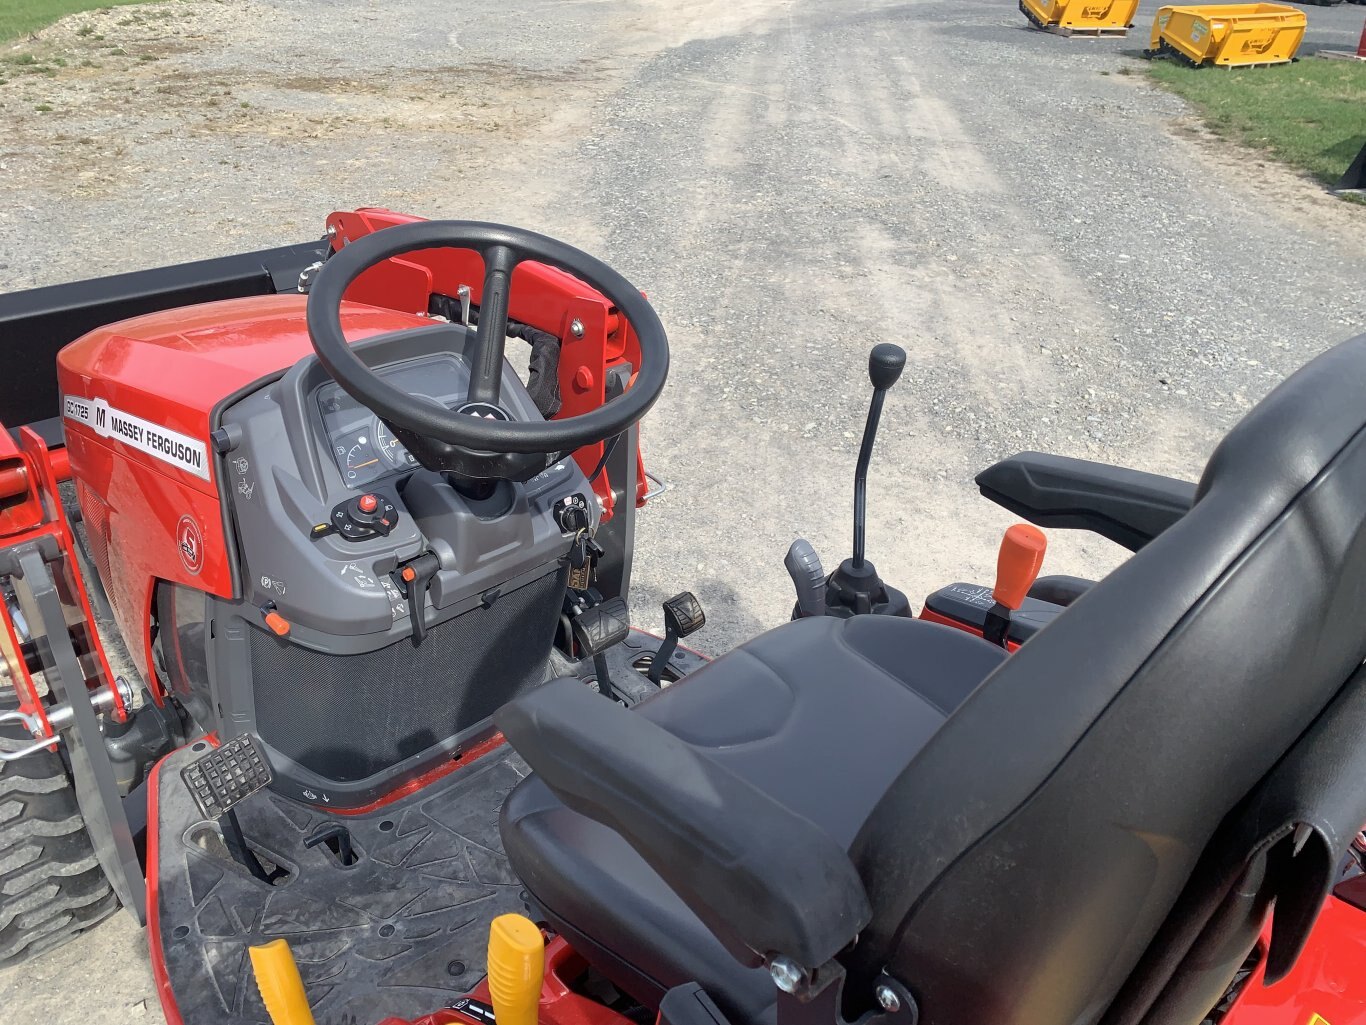 Massey Ferguson GC1725M Premium Sub Compact with Loader on Ag Tires